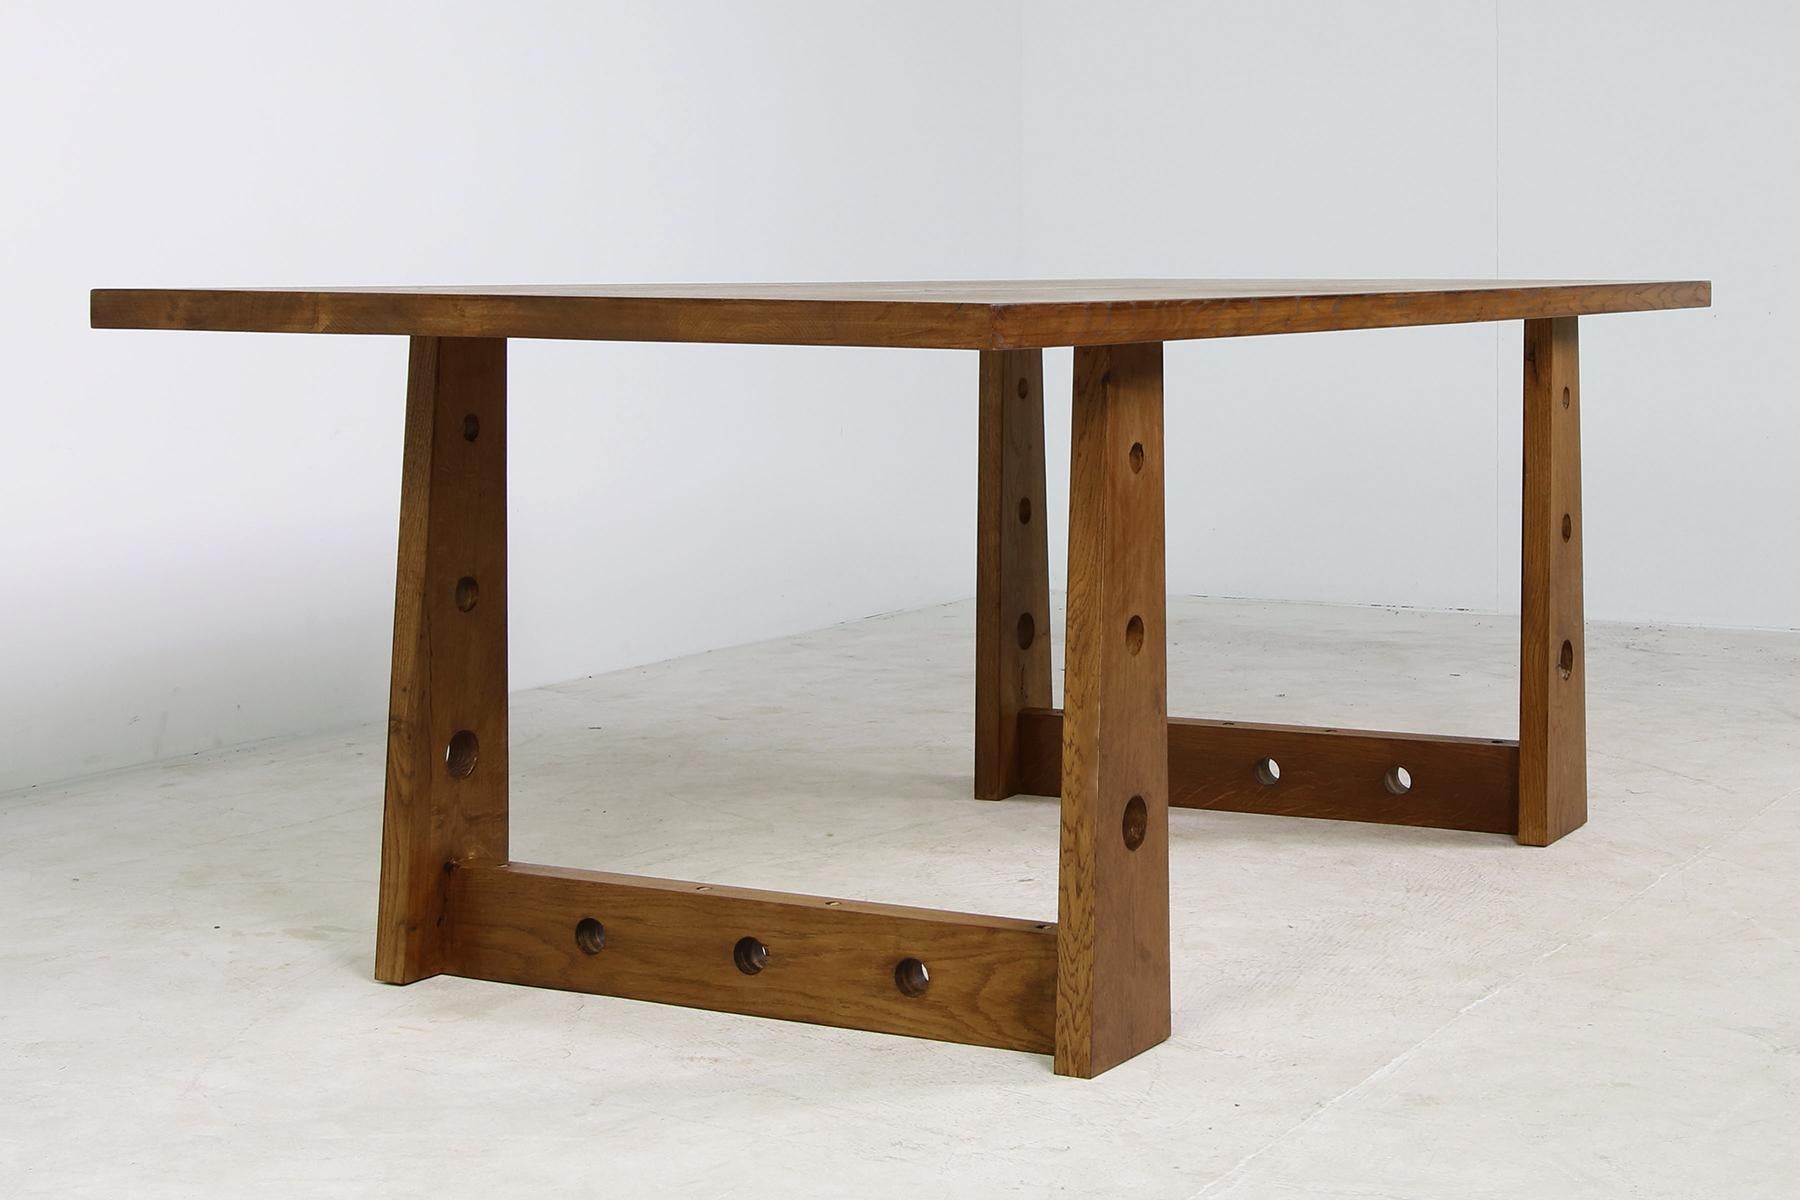 Beautiful contemporary Nathan Lindberg table Mod. #04 heavyweight, solid oak. This piece can be used as a dining table for 6-10 persons (depends on the size of chairs) or as a conference table, or even a large free standing desk.Measure: 6.6